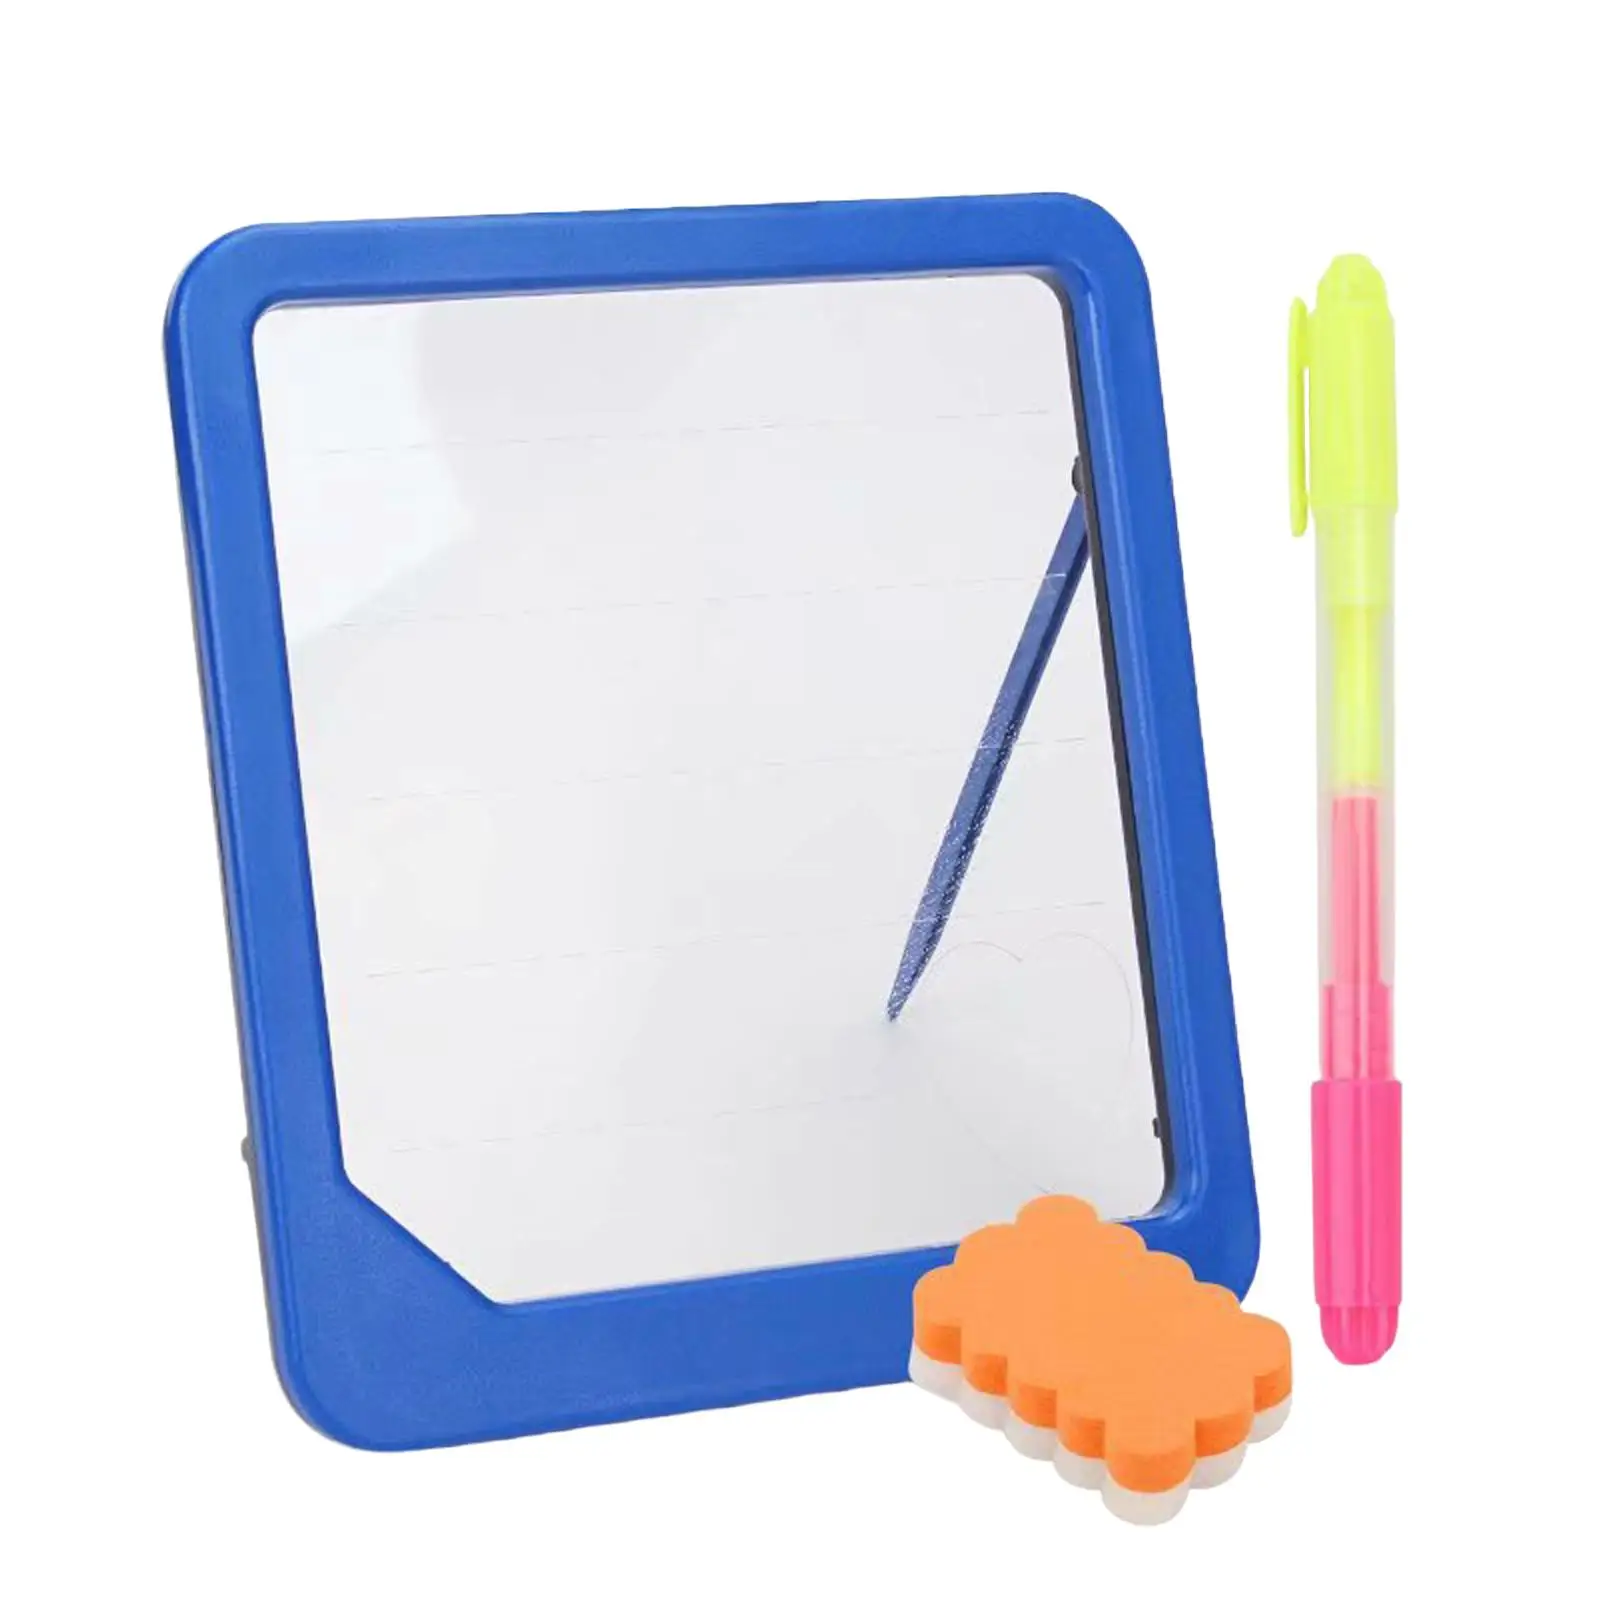 Drawing Tablet Writing Board Light up Drawing Board Handwriting Educational Toy Science and Educational Toys for Children Kids